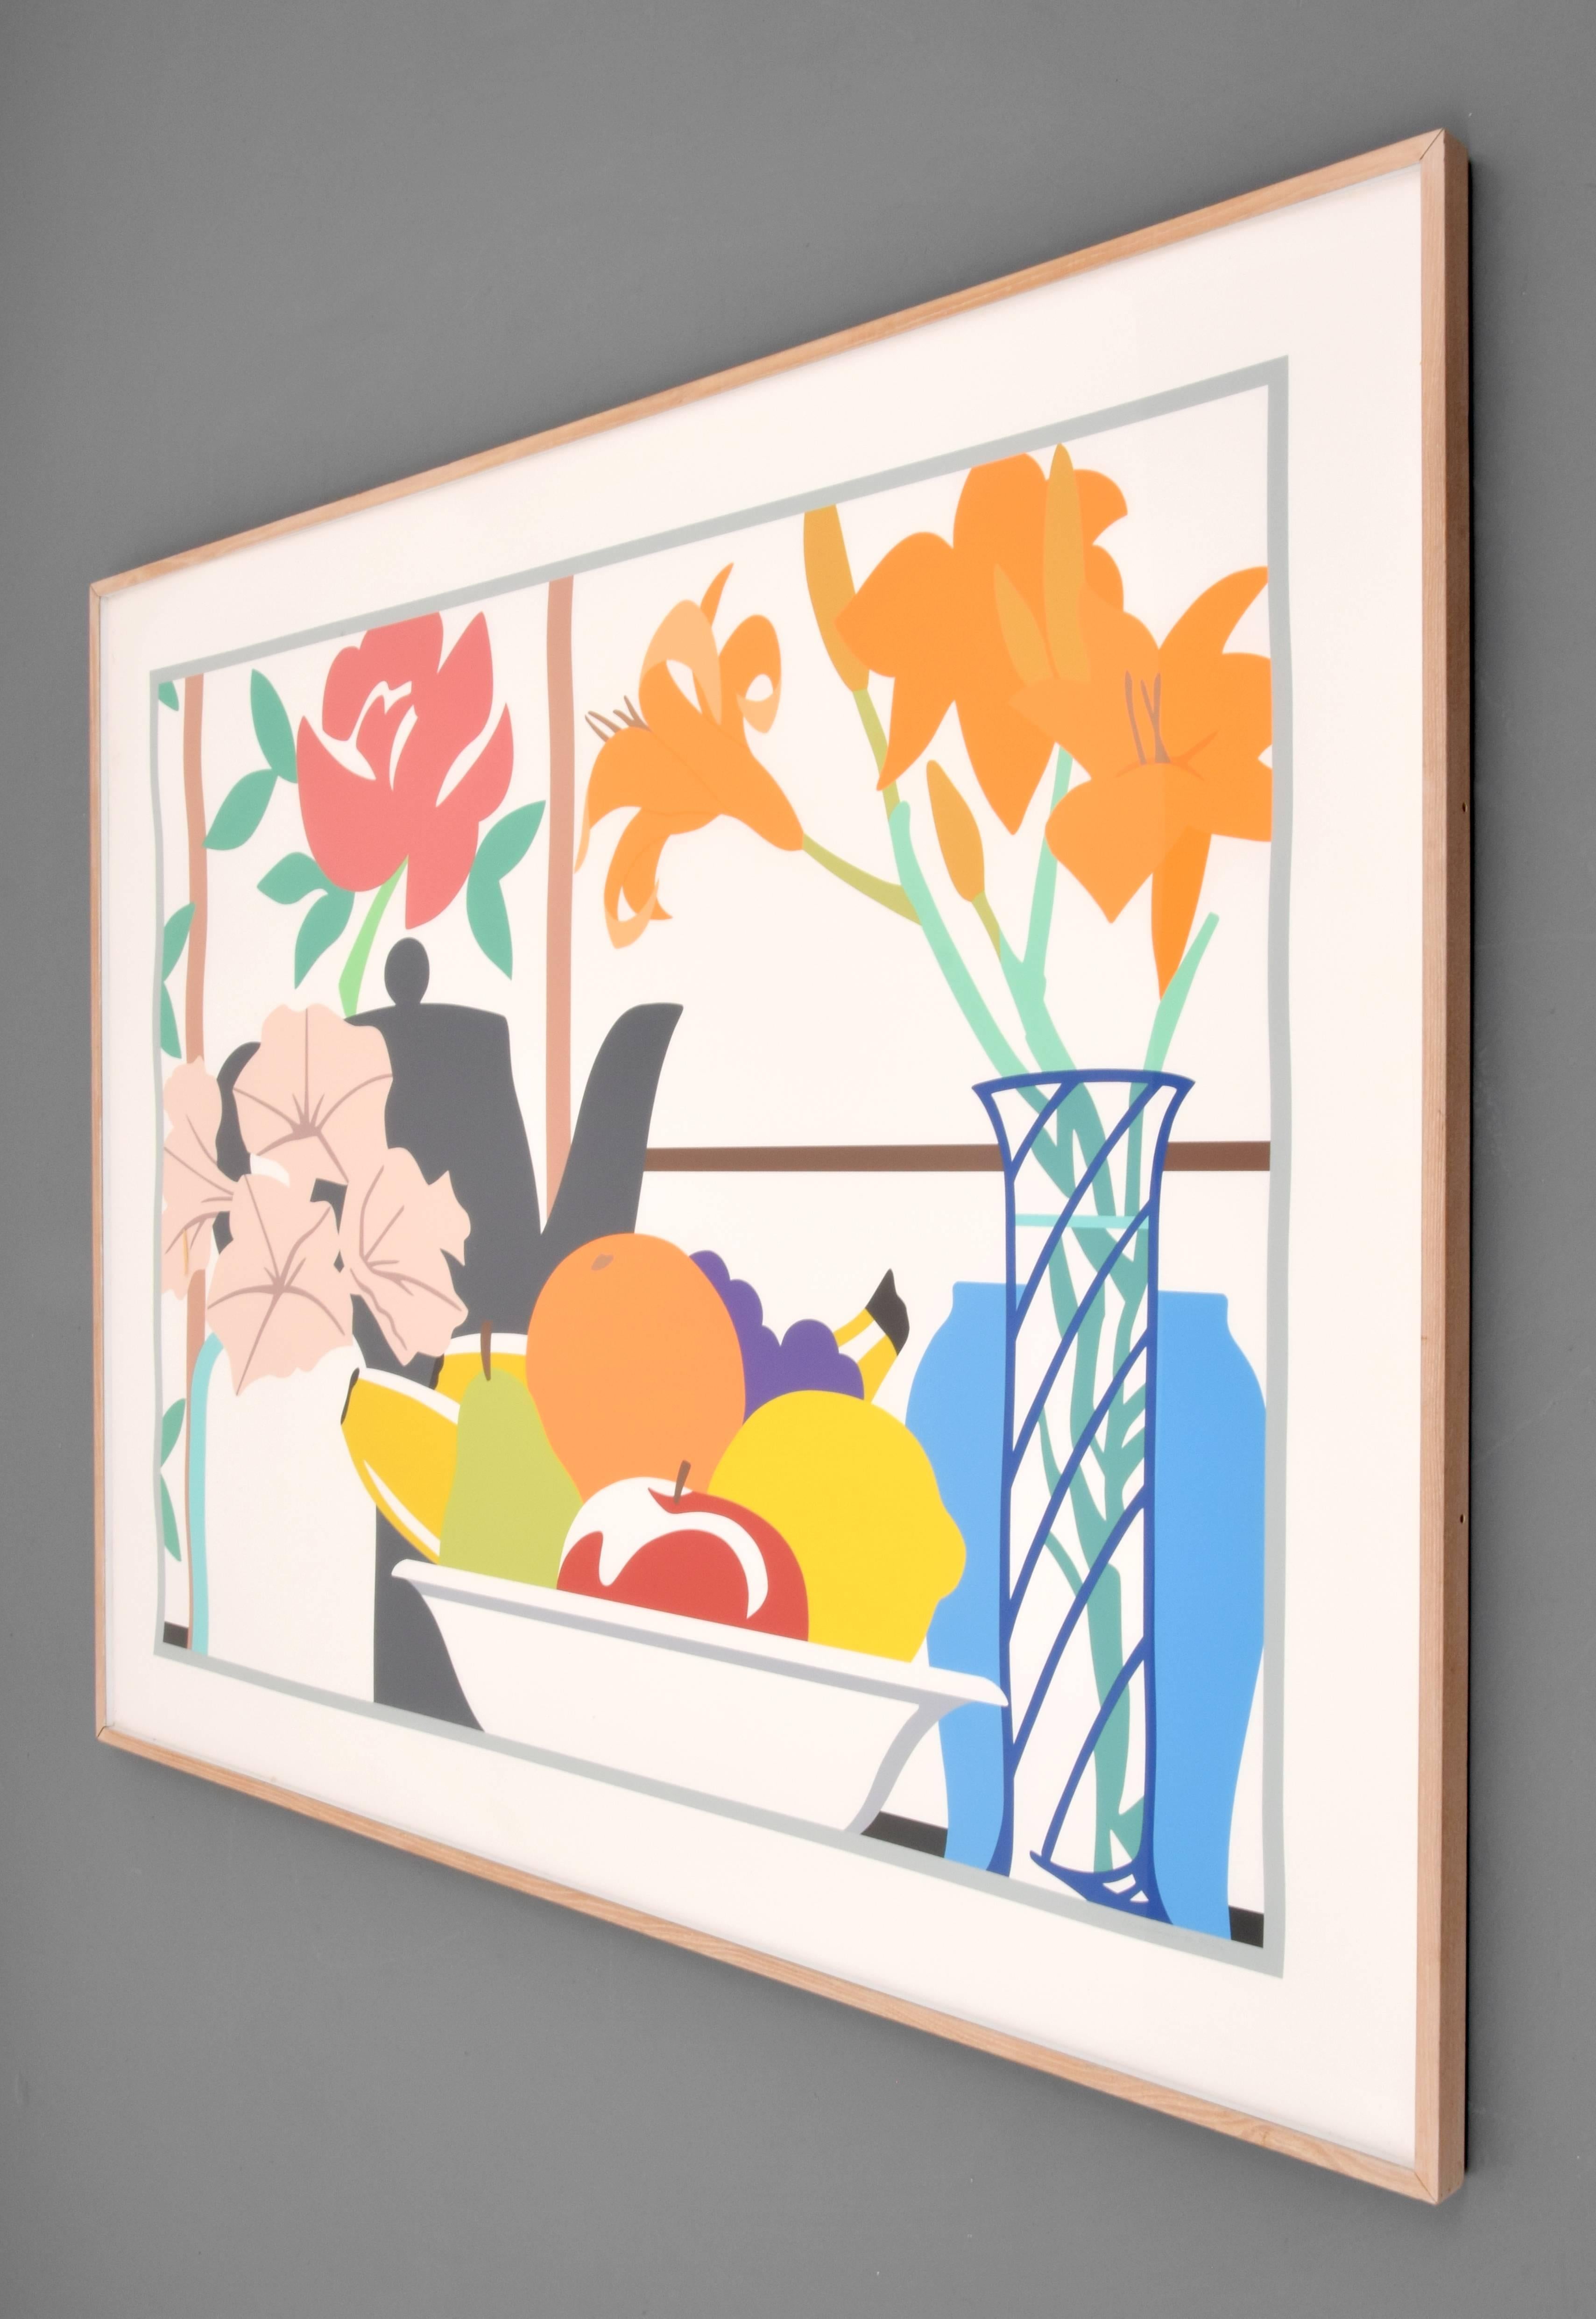 Large lithograph by Tom Wesselmann (1931-2004). Work is titled still life with petunias, lilies and fruit. Image published by International Images, Inc., Putney, Vermont. Provenance: Nan Miller Gallery, New York Private Collection,